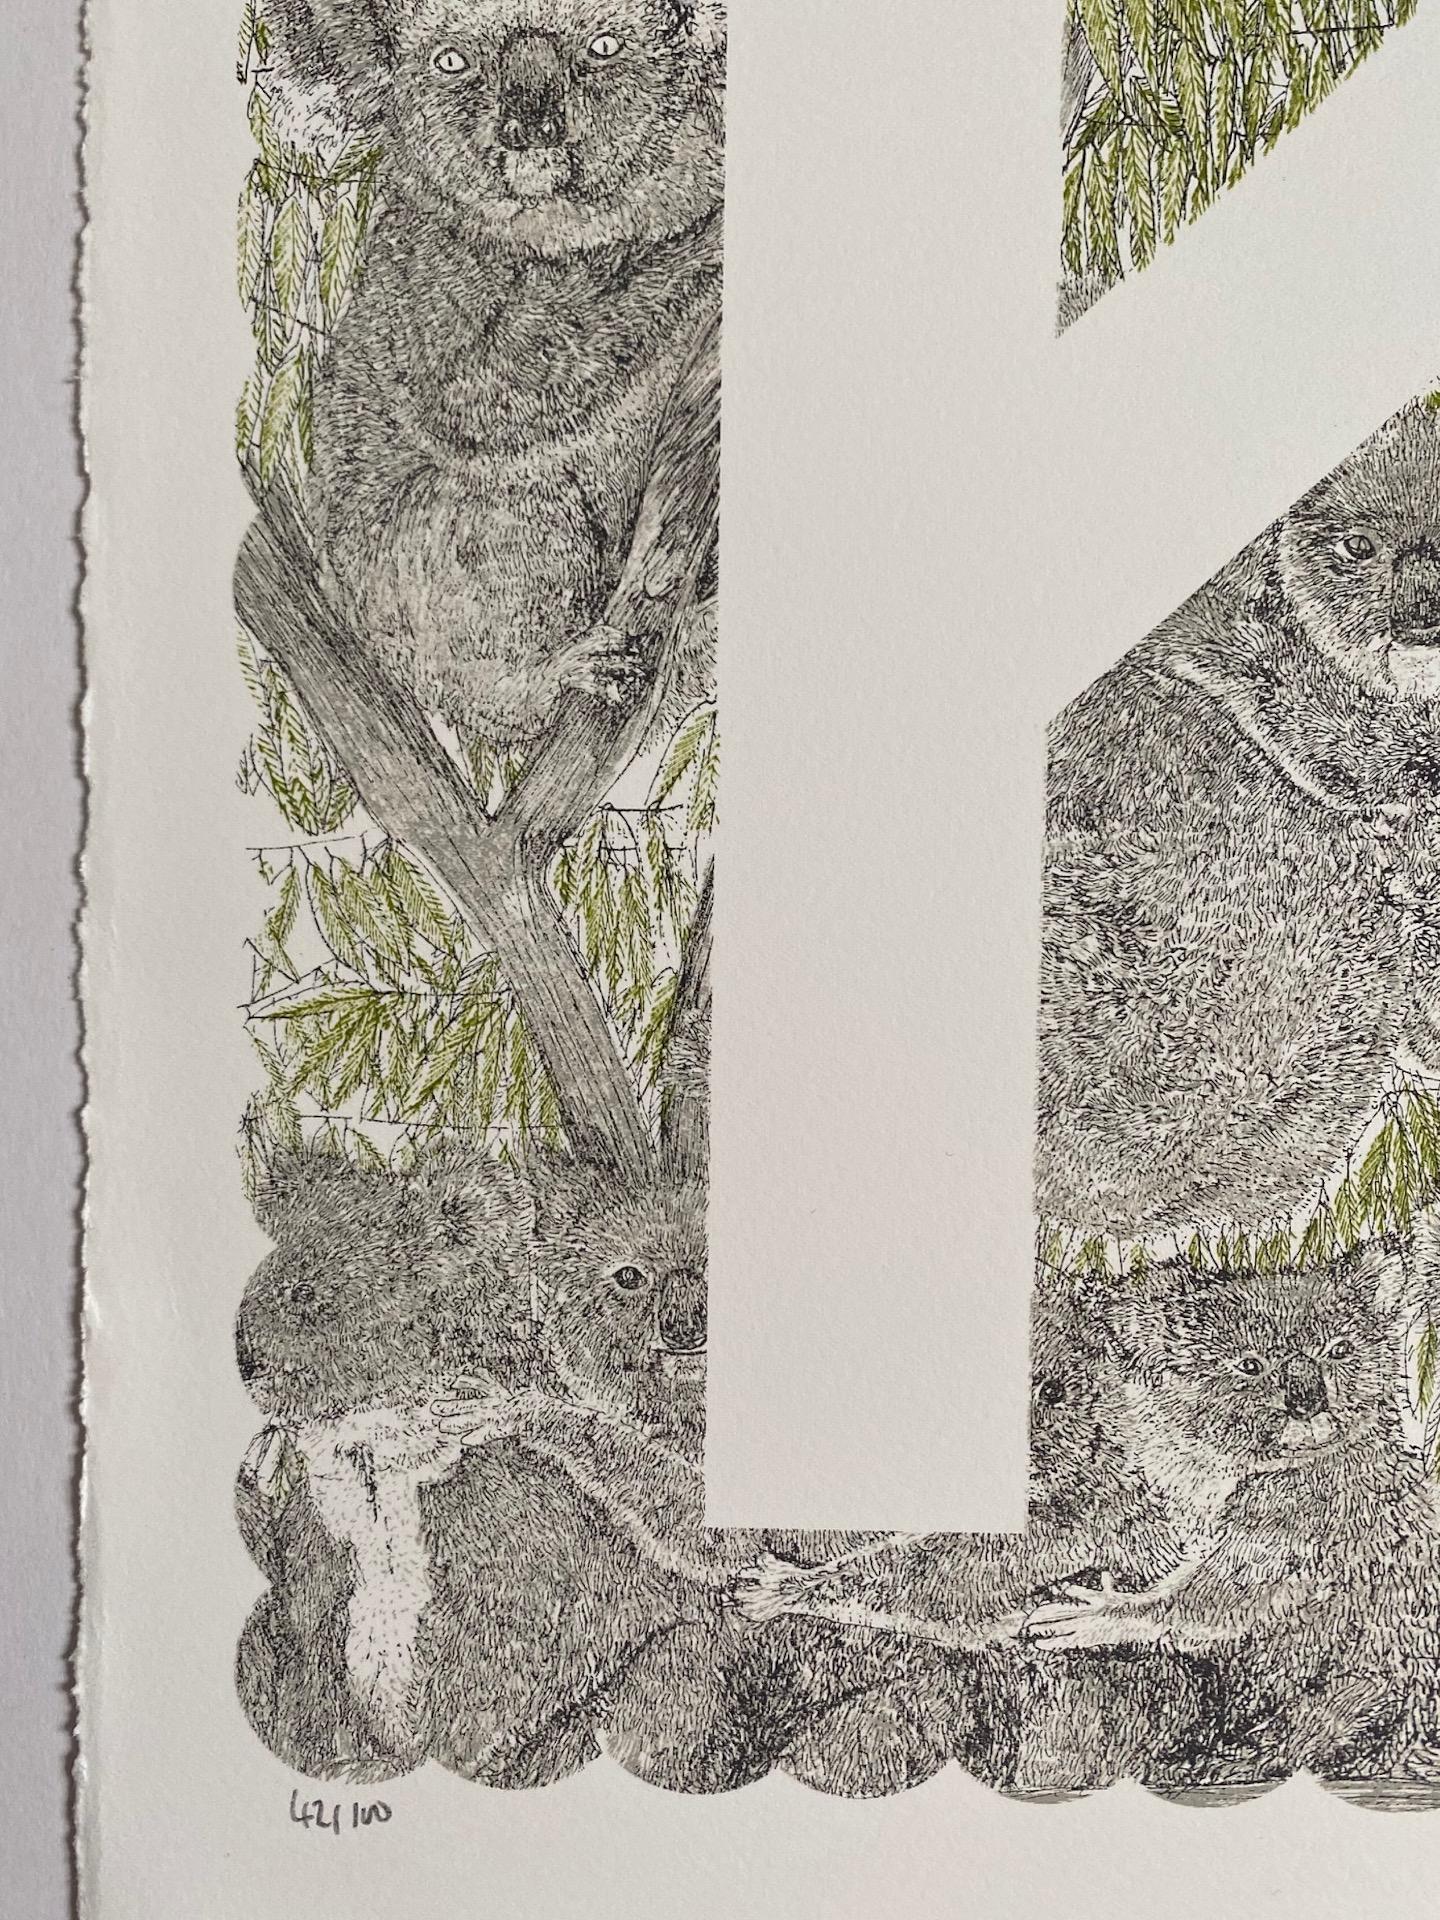 Clare Halifax
K is for Koala
Limited Edition 3 colour screen print
Edition of 100
Sheet Size: H 38cm x W 37cm x 0.1cm
Sold Unframed
Hand printed by the artist onto somerset satin paper 300gms with deckle edge.
Please Note that in situ images are